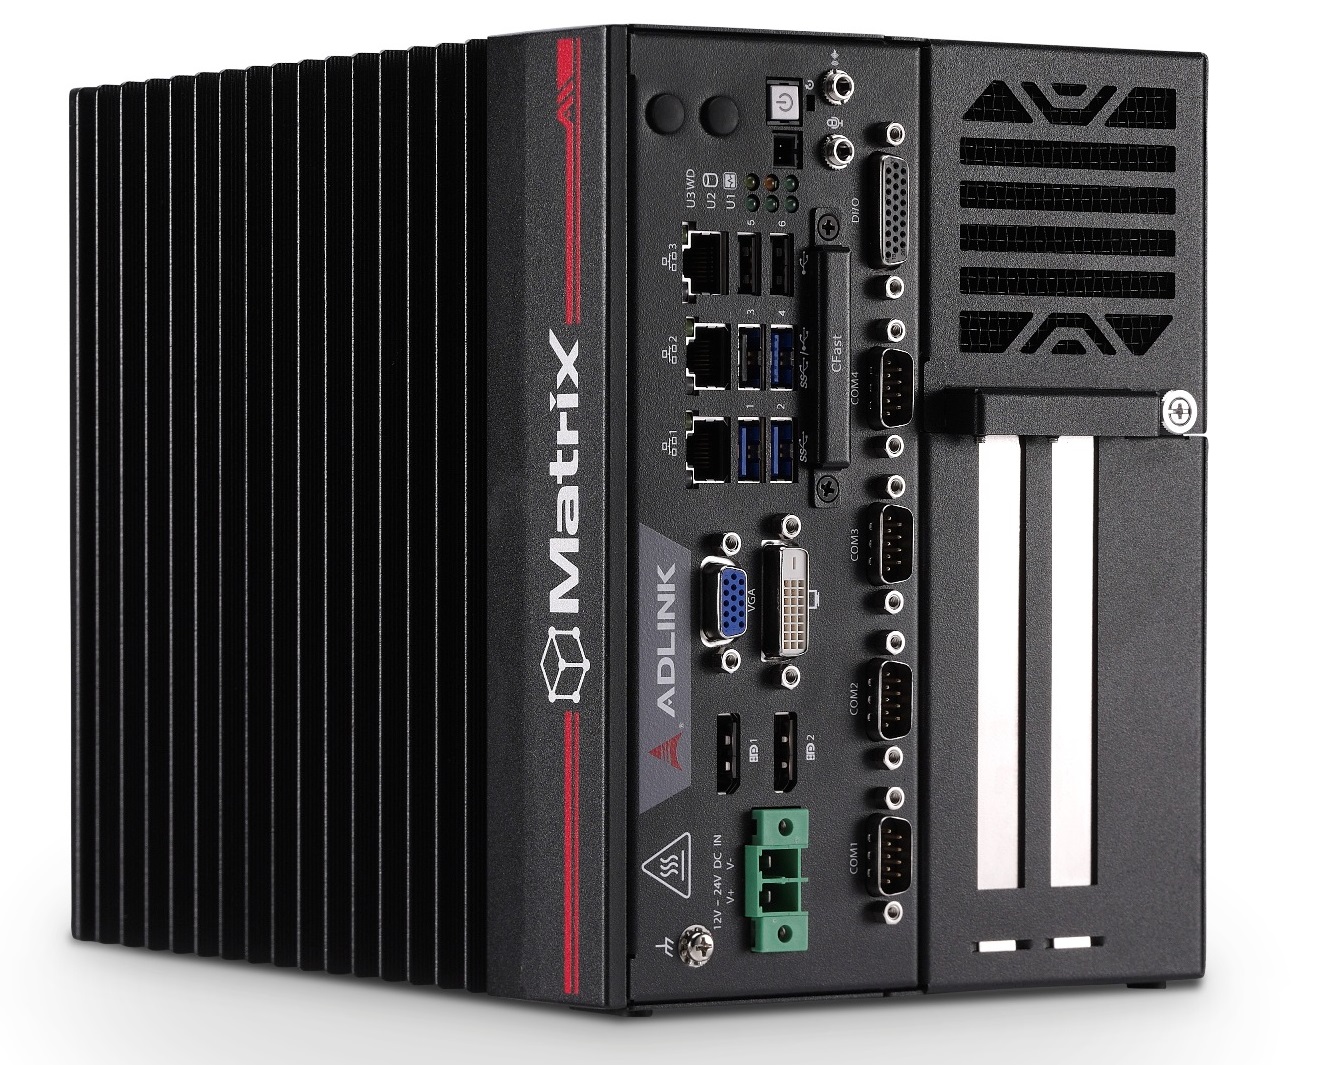 Fanless Embedded Computer with 9th Generation Intel® Core™, supporting PCIe Graphics Card, Frame Grabber, Data Acquisition & Motion Control